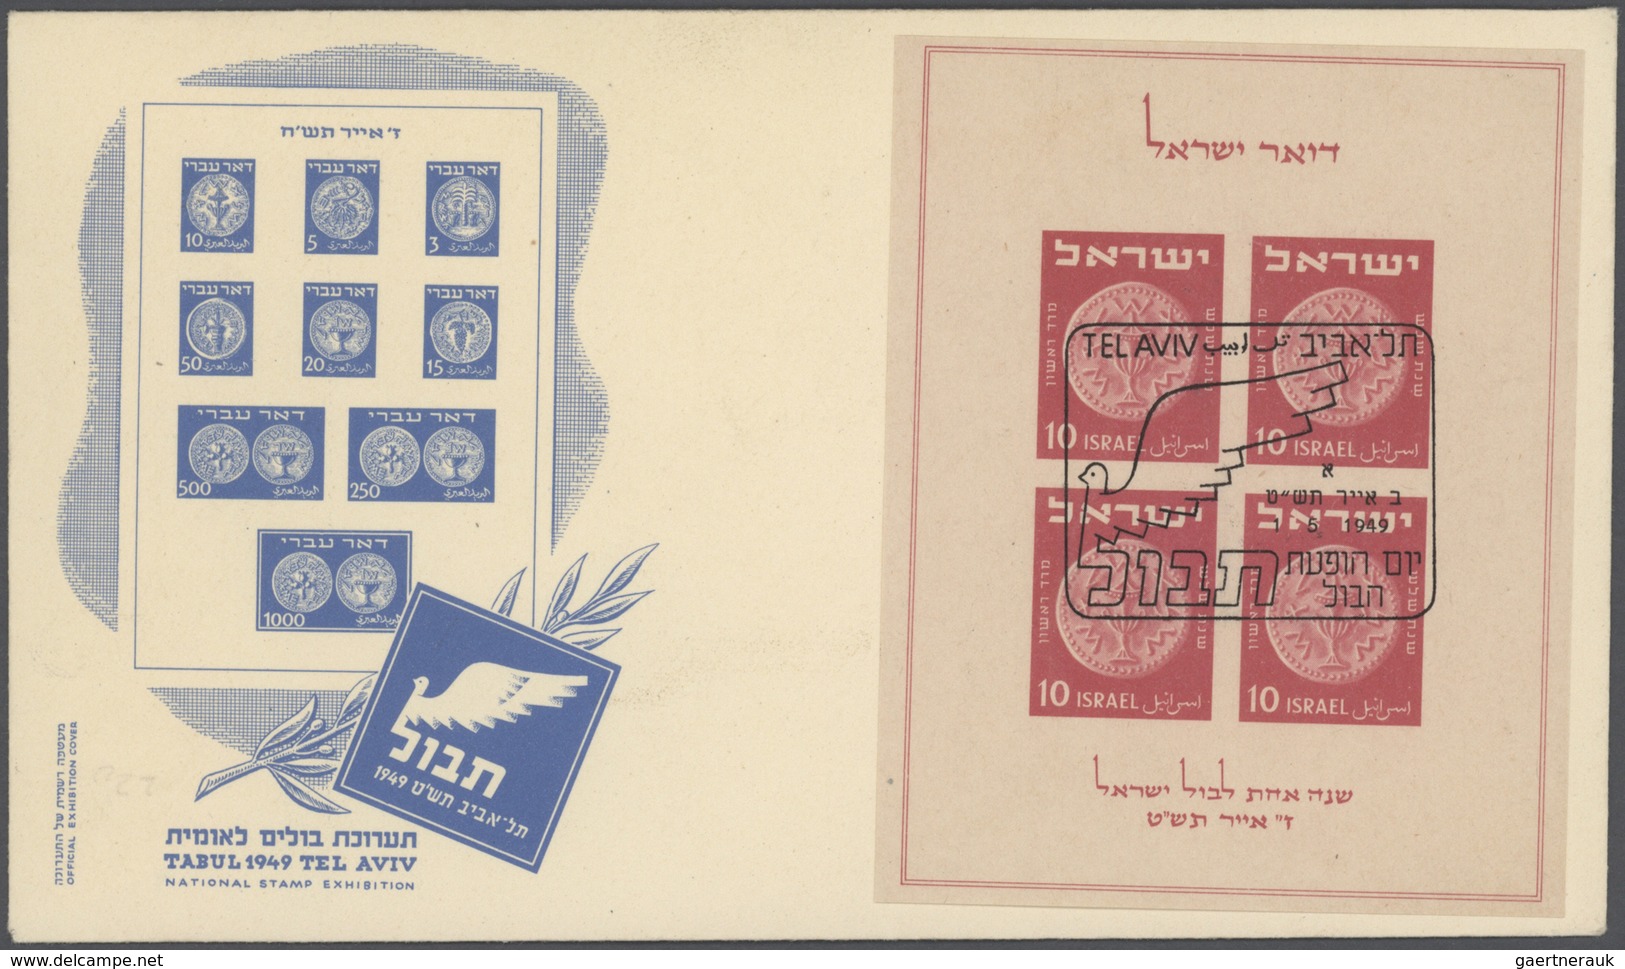 Israel: 1948/1993, collection/accumulation of apprx. 430 covers (f.d.c./commemorative covers referri